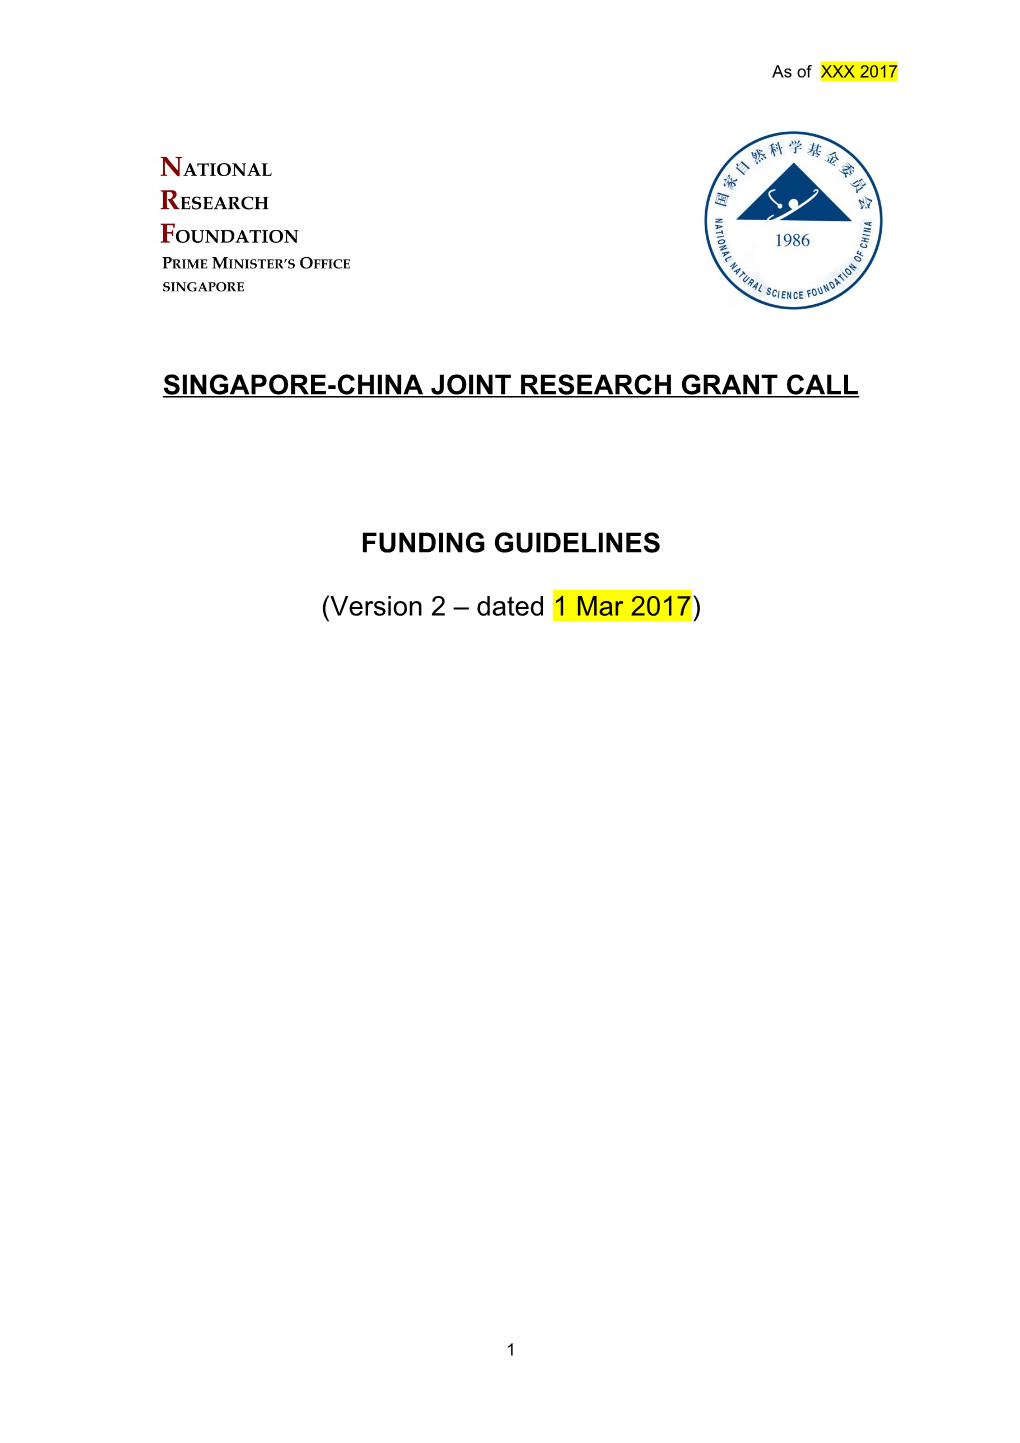 Singapore-Chinajoint Research Grant Call